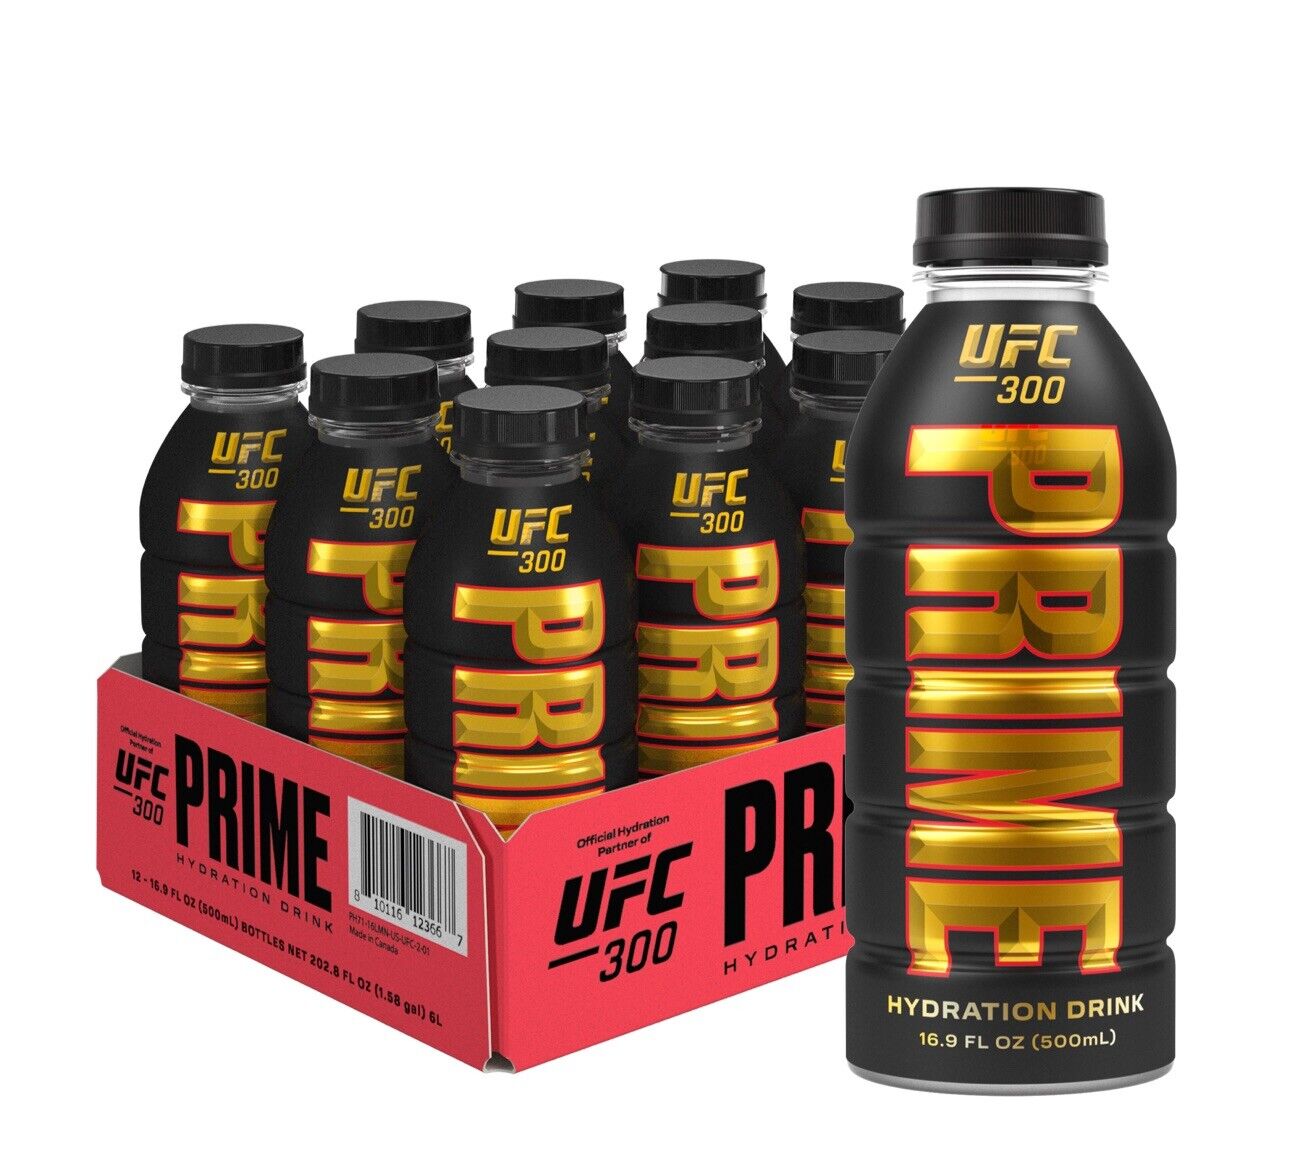 UFC 300 PRIME HYDRATION DRINK 12 PACK LIMITED EDITION